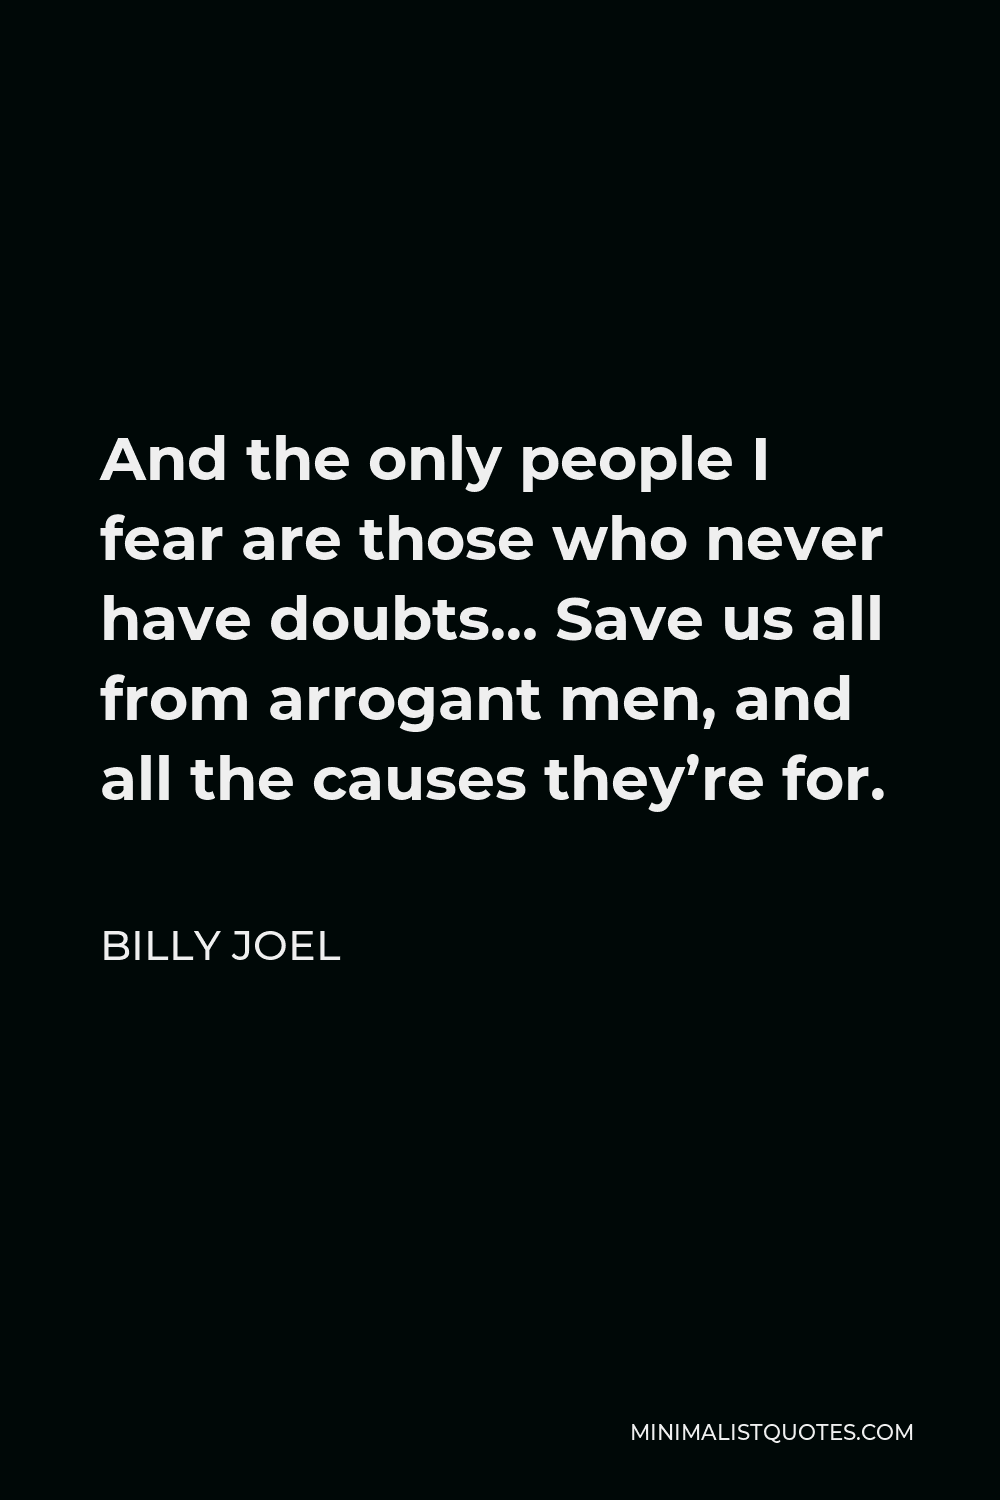 Billy Joel Quote - And the only people I fear are those who never have doubts… Save us all from arrogant men, and all the causes they’re for.